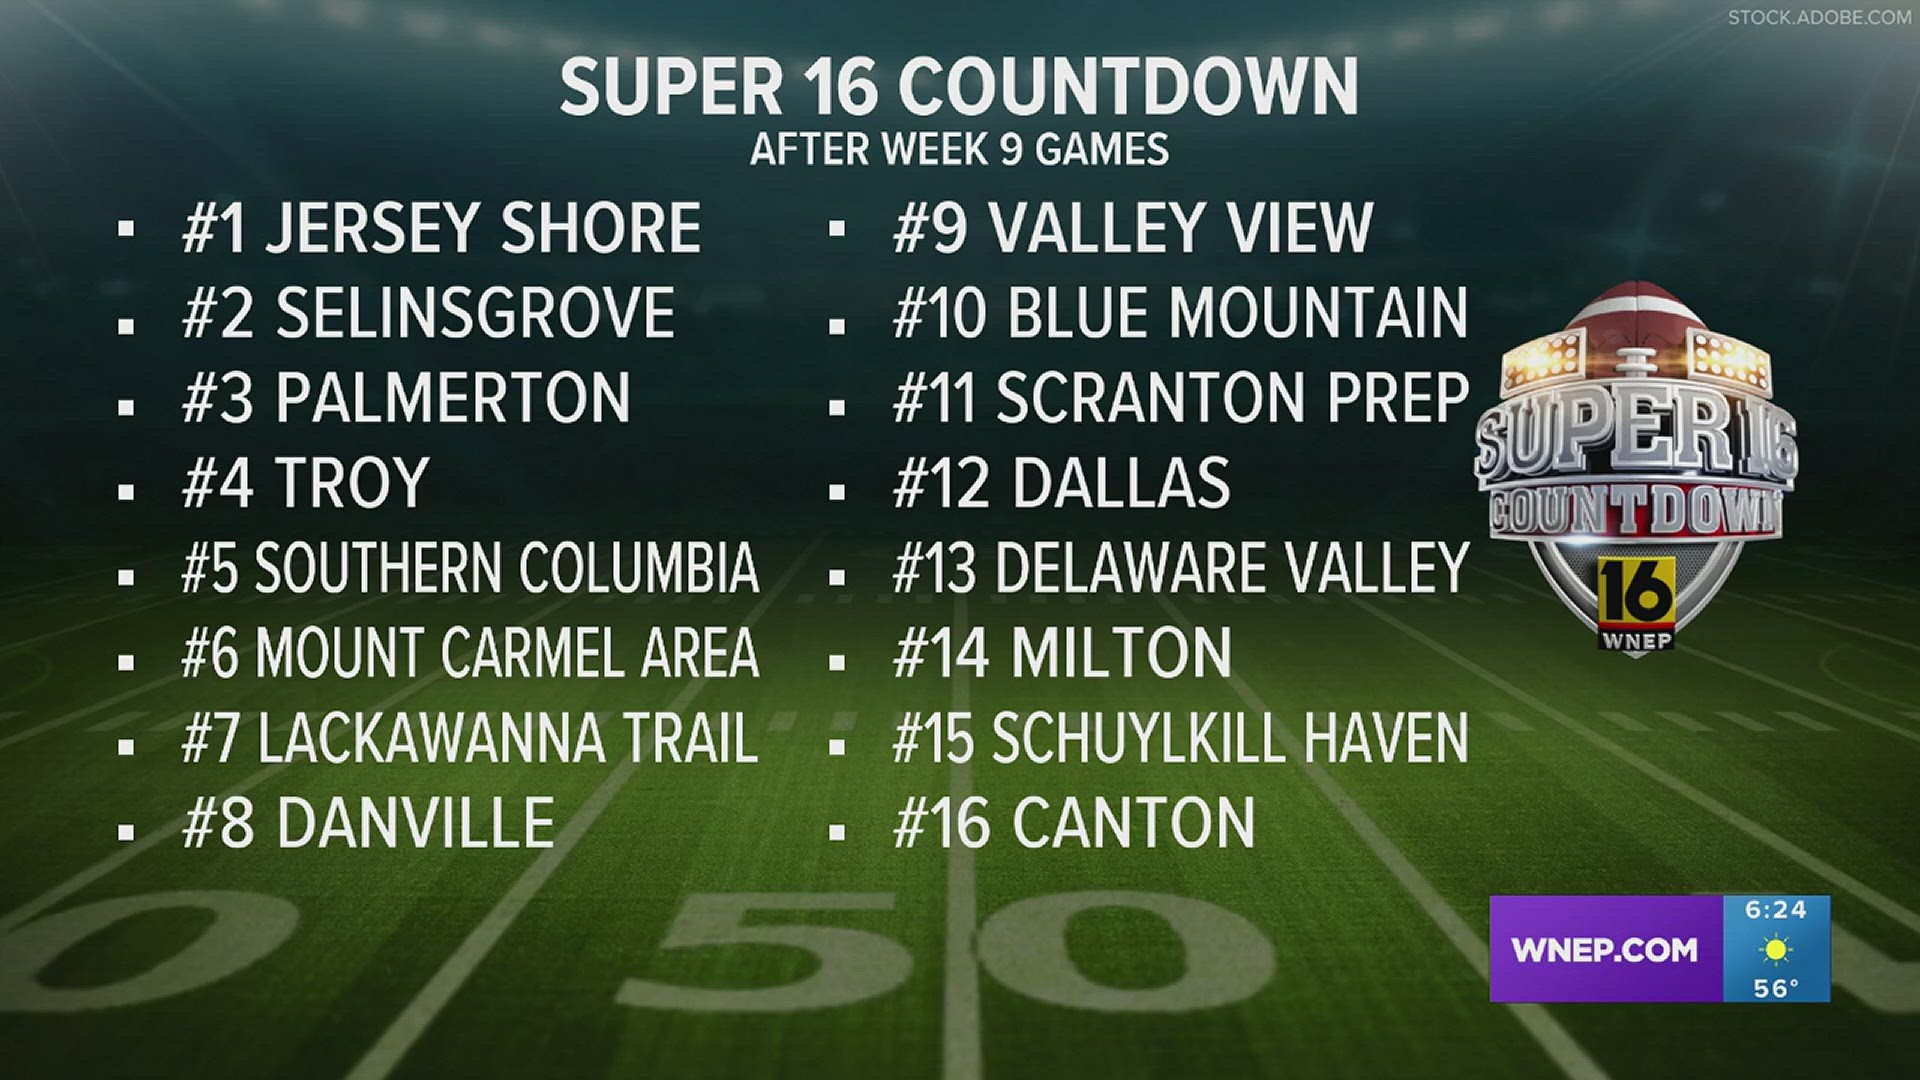 Jersey Shore still the #1 team in the Super 16 Football Countdown